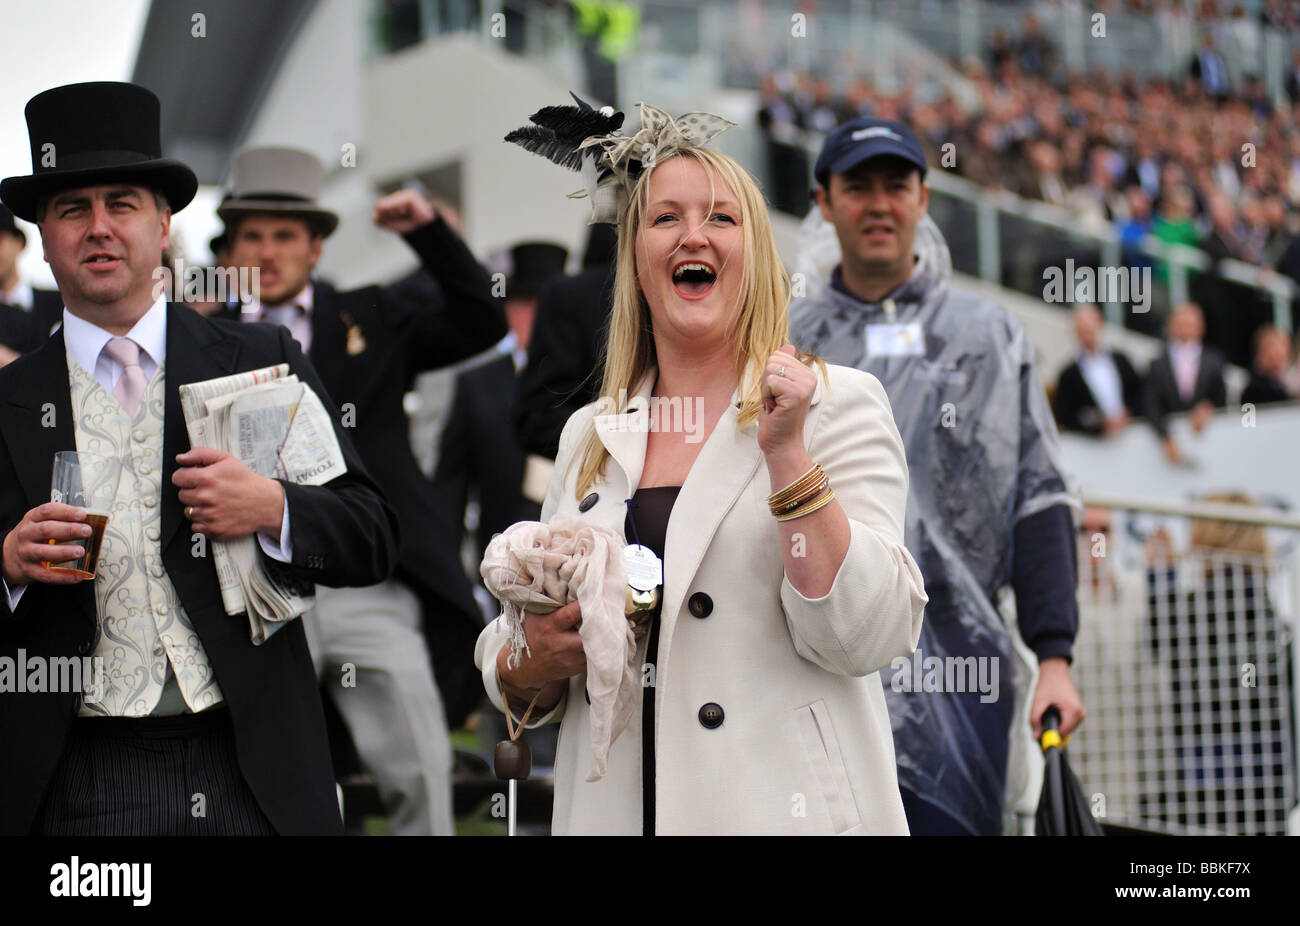 A woman race goer cheering on her winning horse at the Investec Epsom Derby 2009 Stock Photo